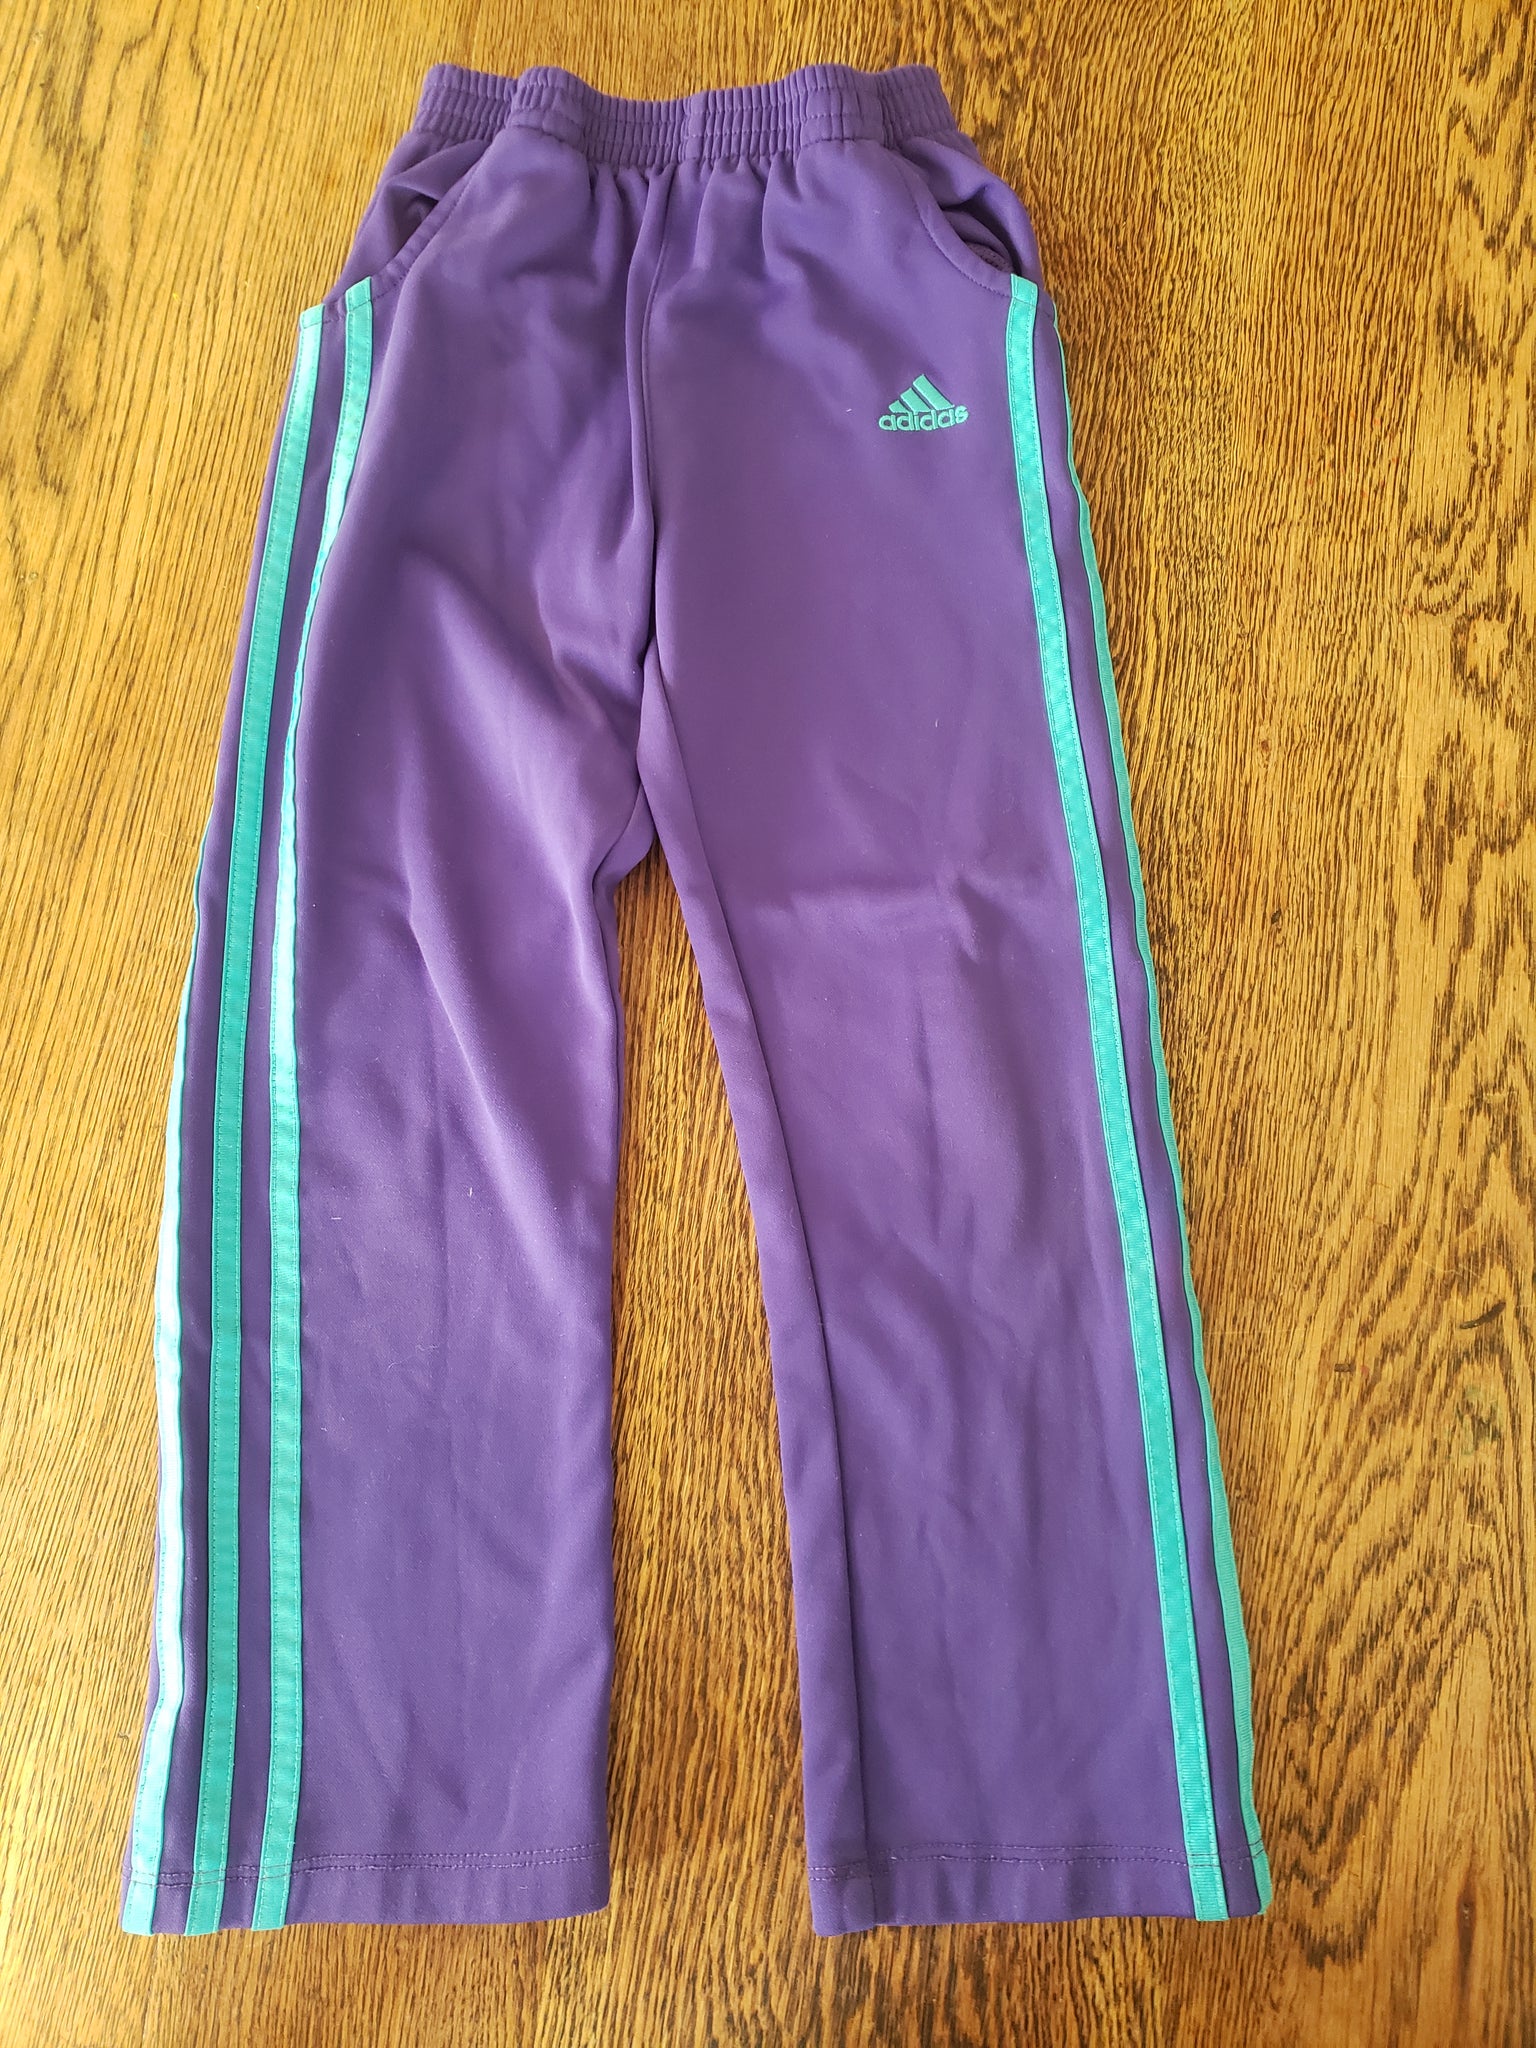 Adidas Purple Track Pants, Men's Fashion, Bottoms, Trousers on Carousell